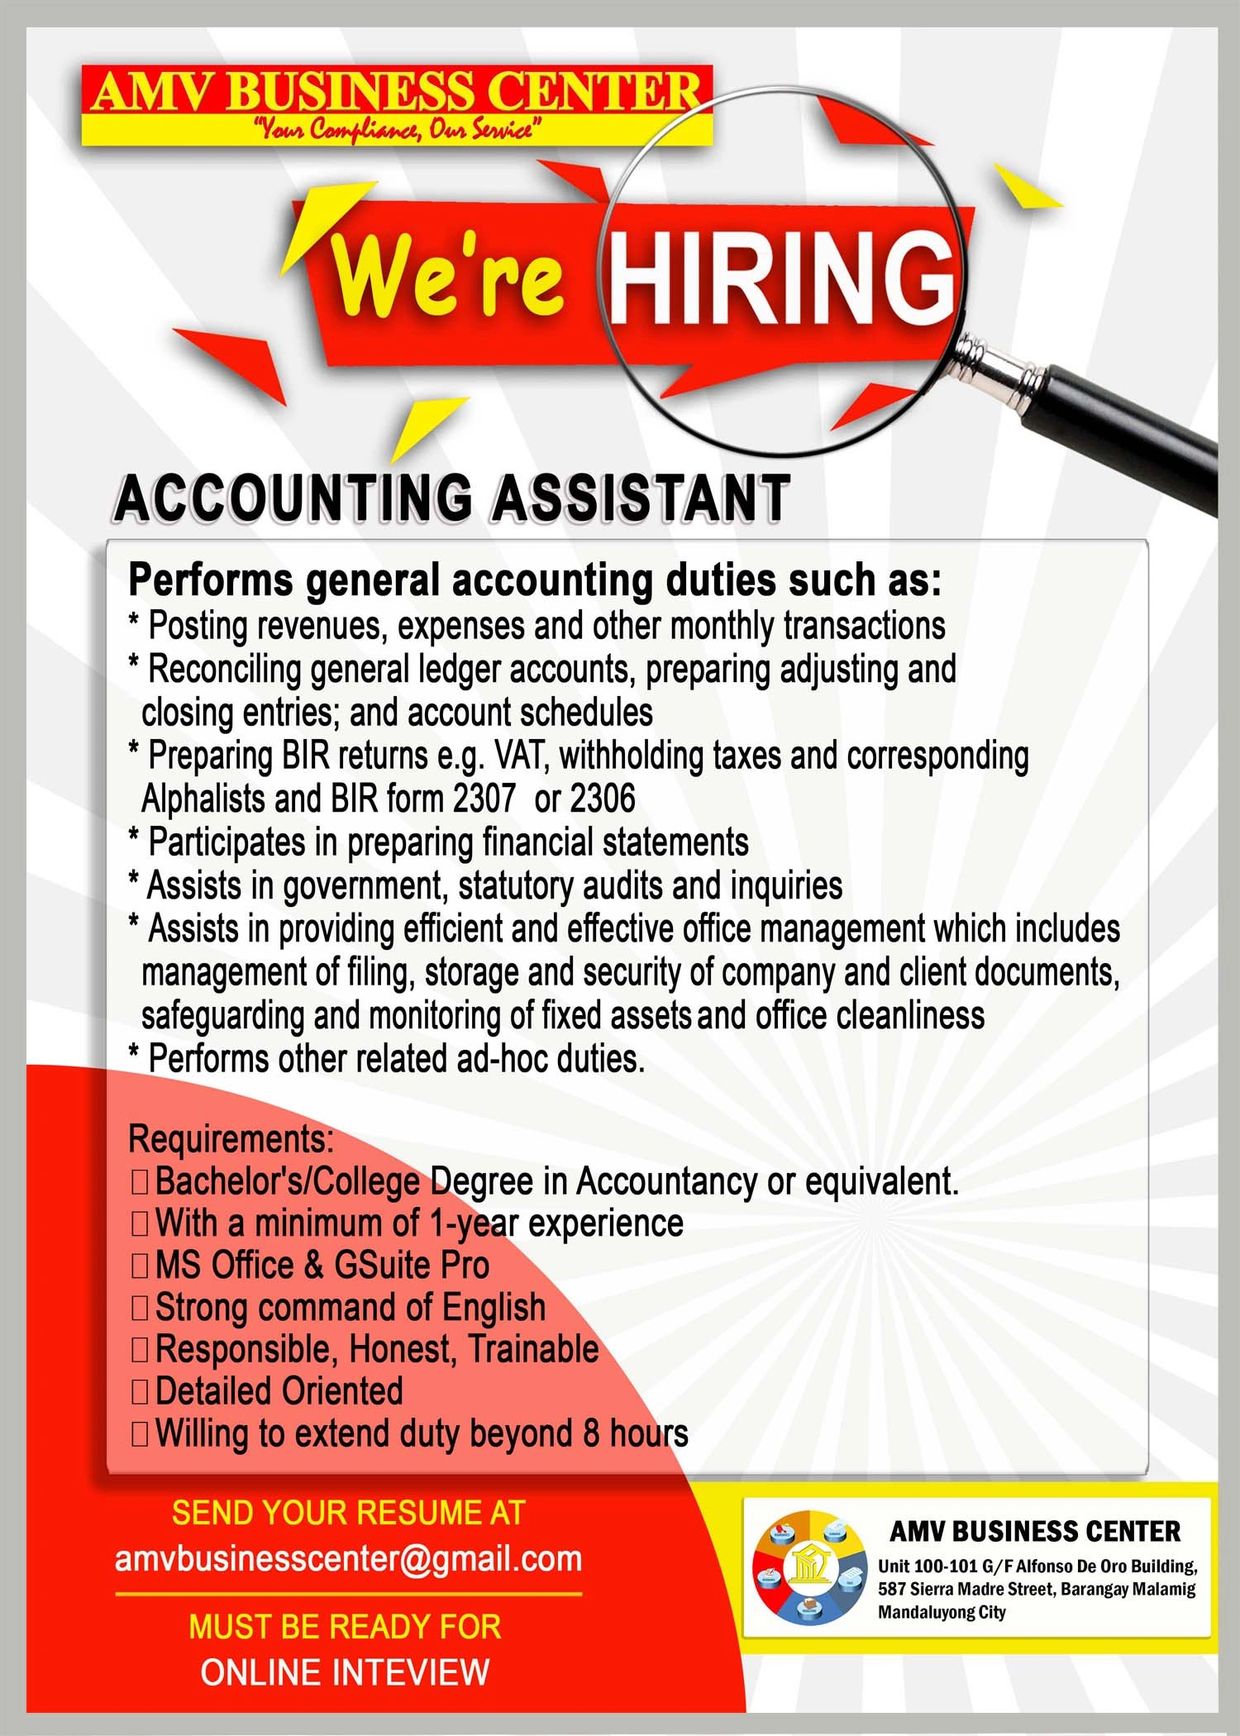 Accounting Assistant, General Accounting, Accounting job, accounting job in Mandaluyong, Accounting